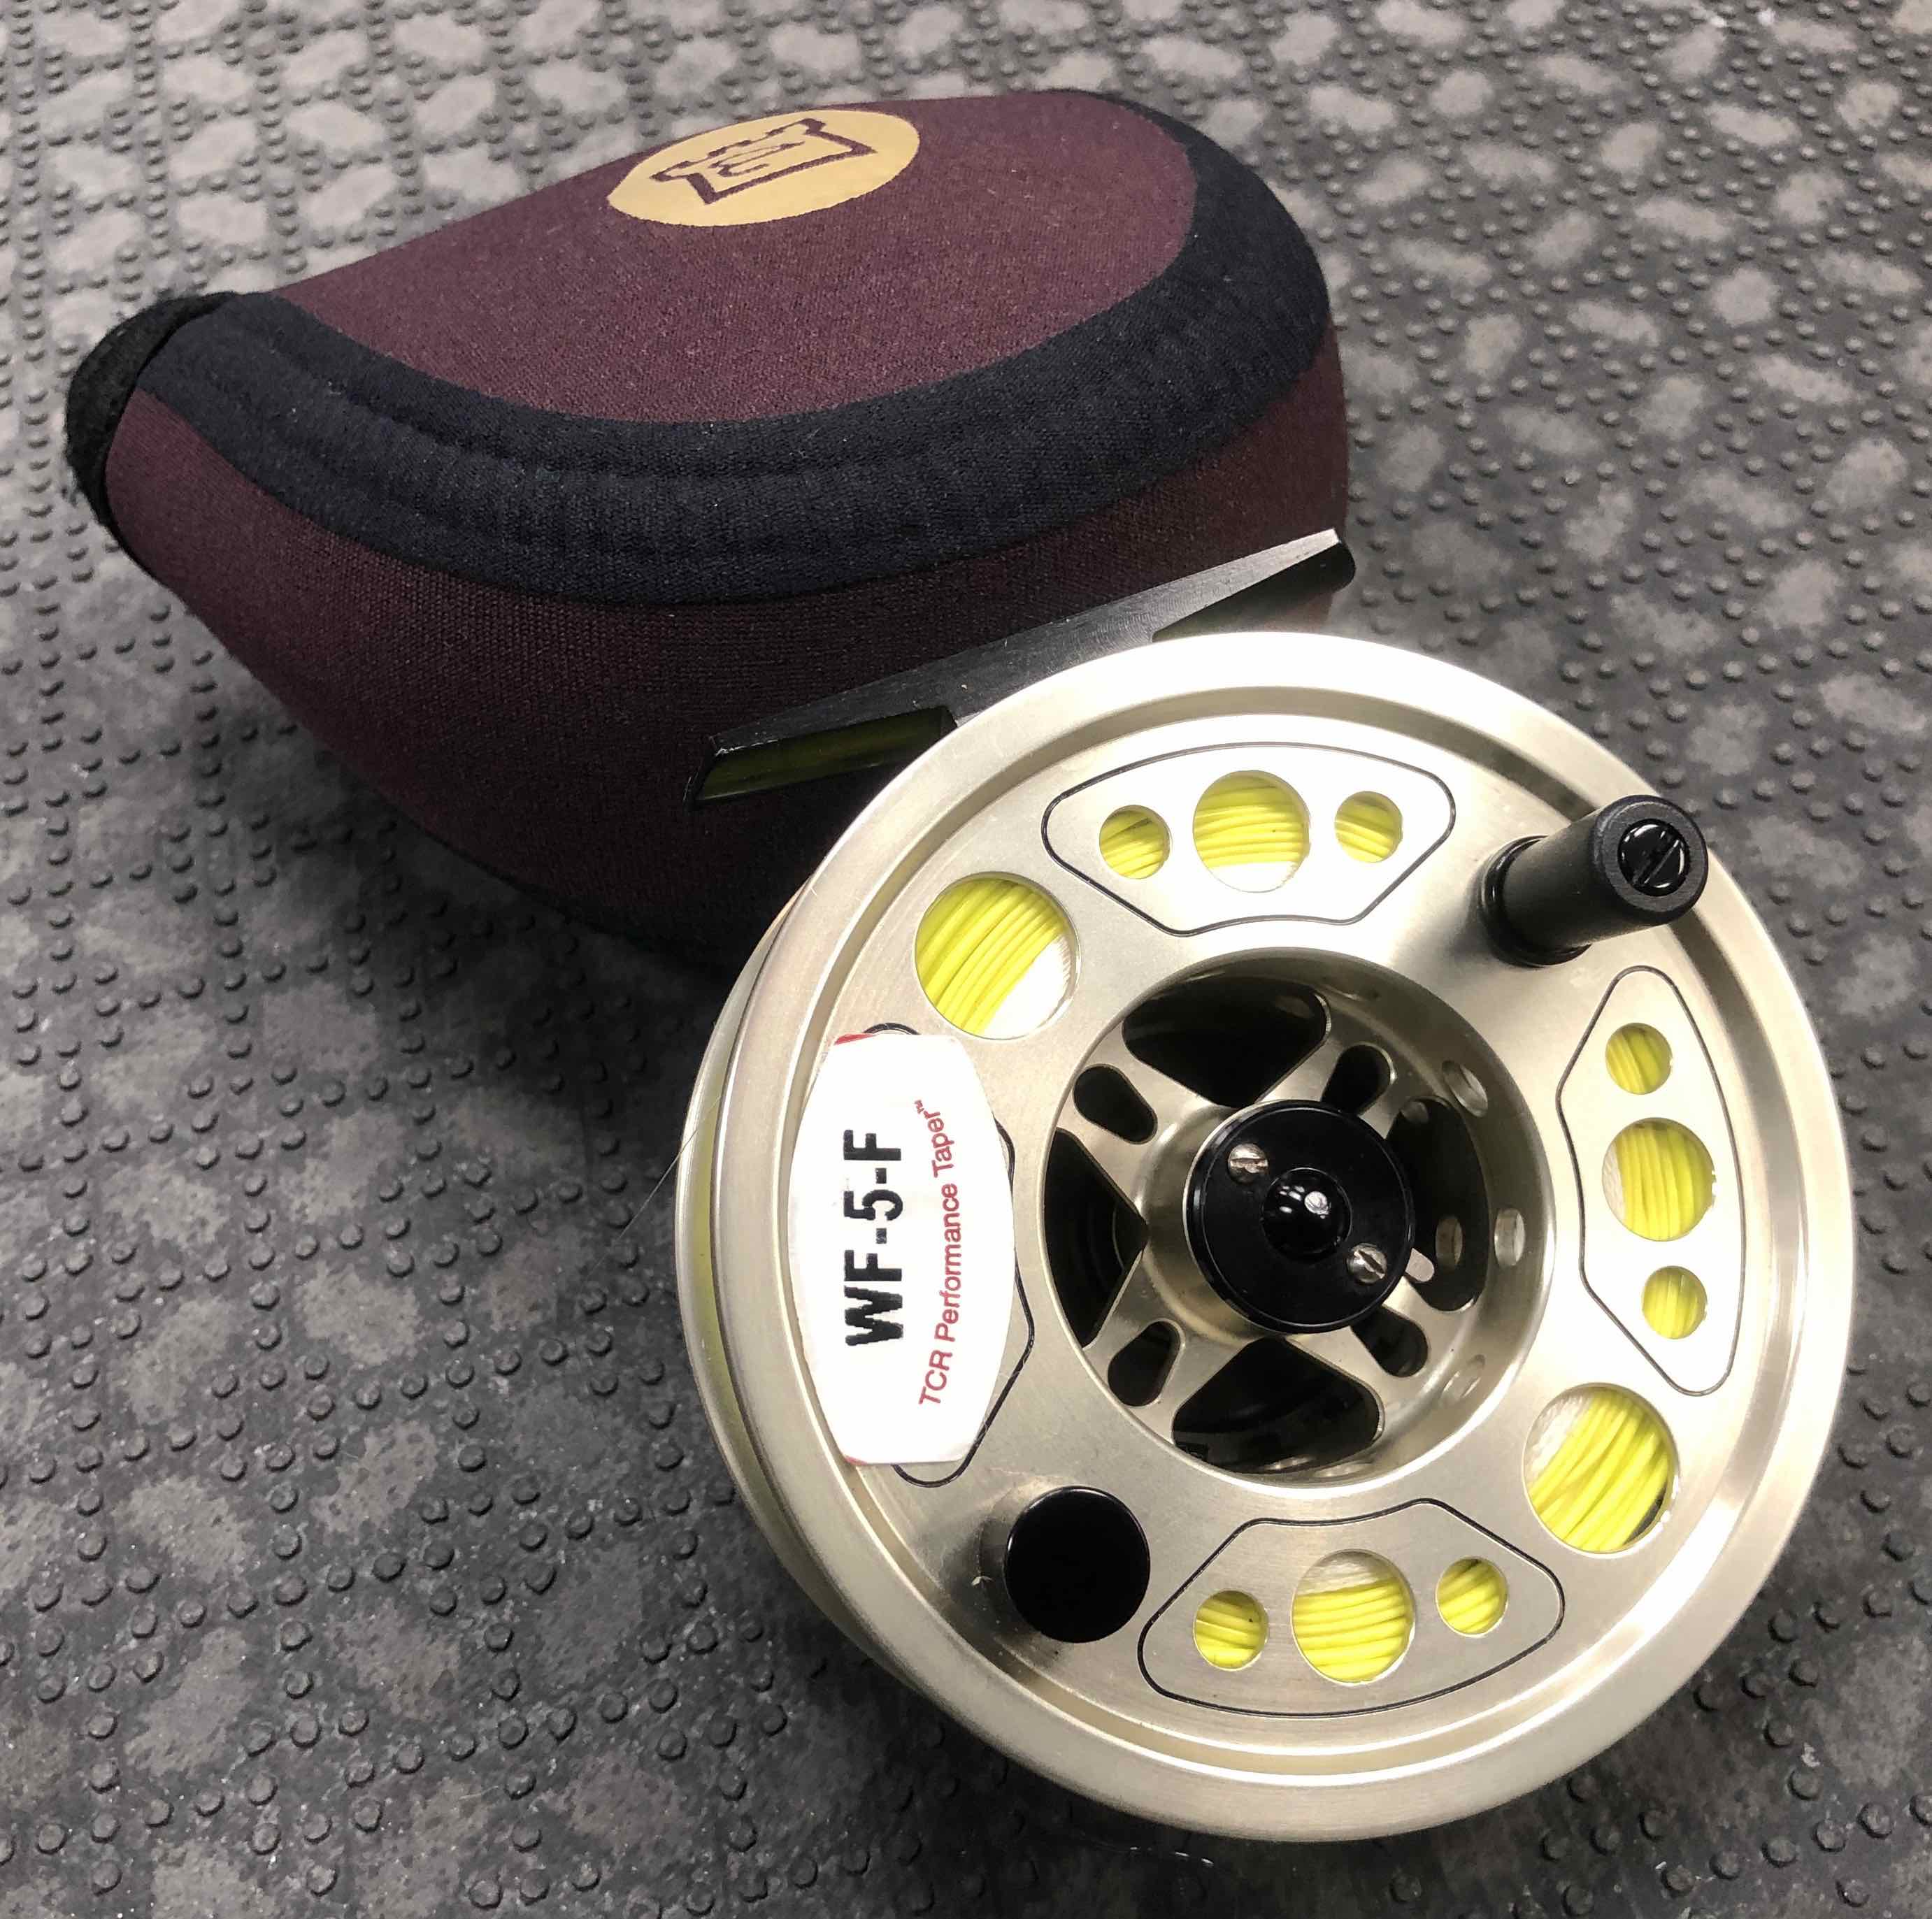 House of Hardy - Gem Series Fly Reel - Size 5/6 - C/W A Scientific Anglers WF5F Fly Line - GREAT SHAPE! - $150